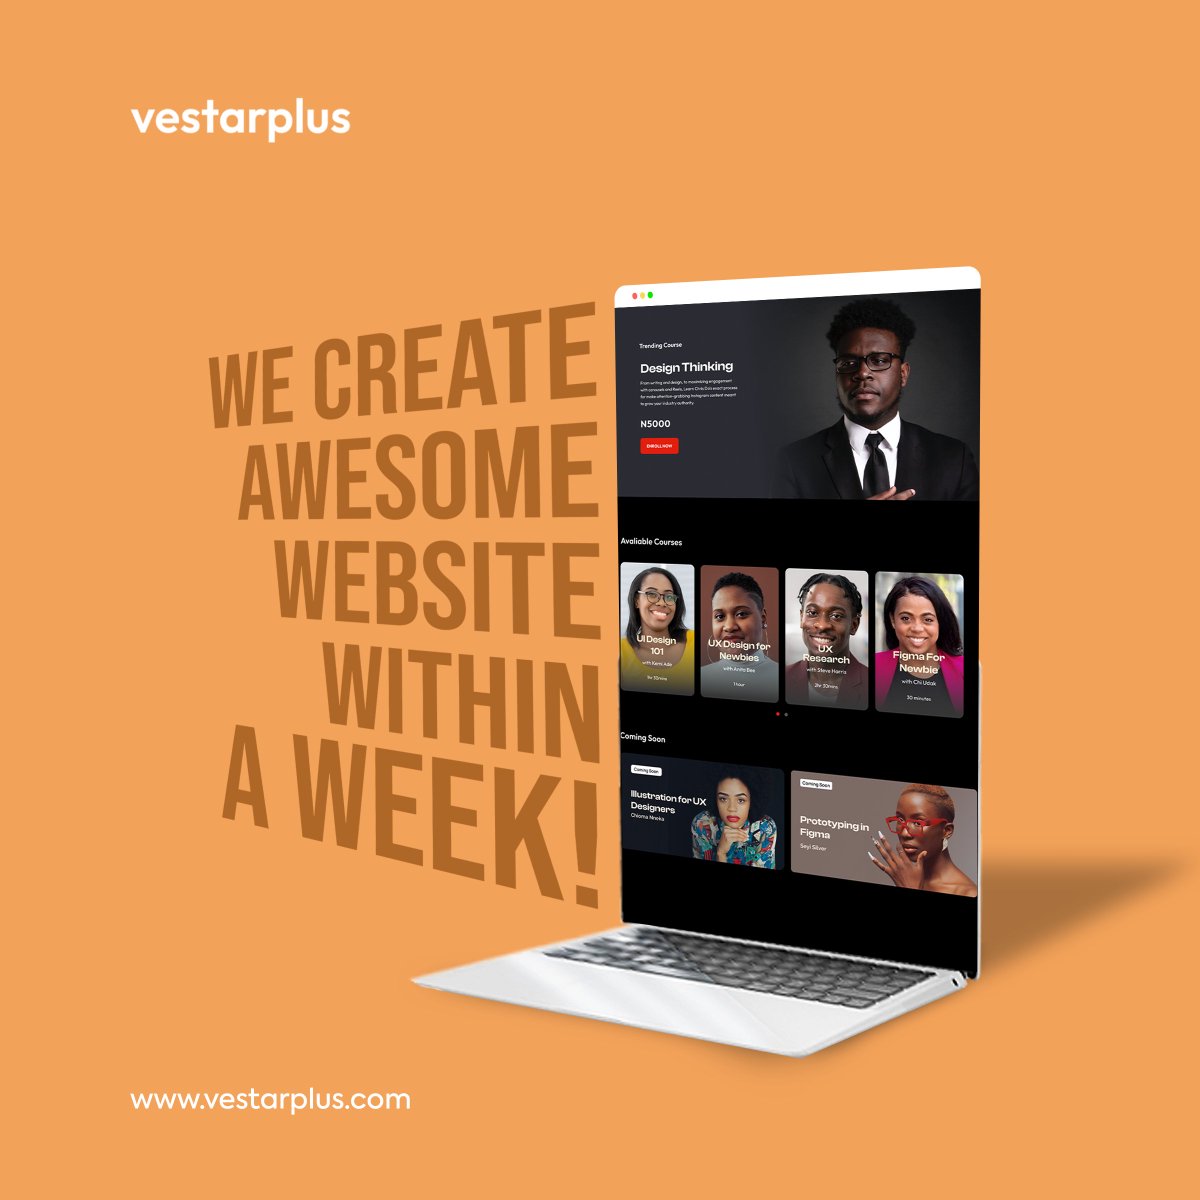 Do you need a website? We create awesome website within a week! Send a dm NOW or call +2348022861622 to schedule a meeting…… #webdevelopment #webdesign #tech #startup #seo #web #graphicdesign #webdeveloper